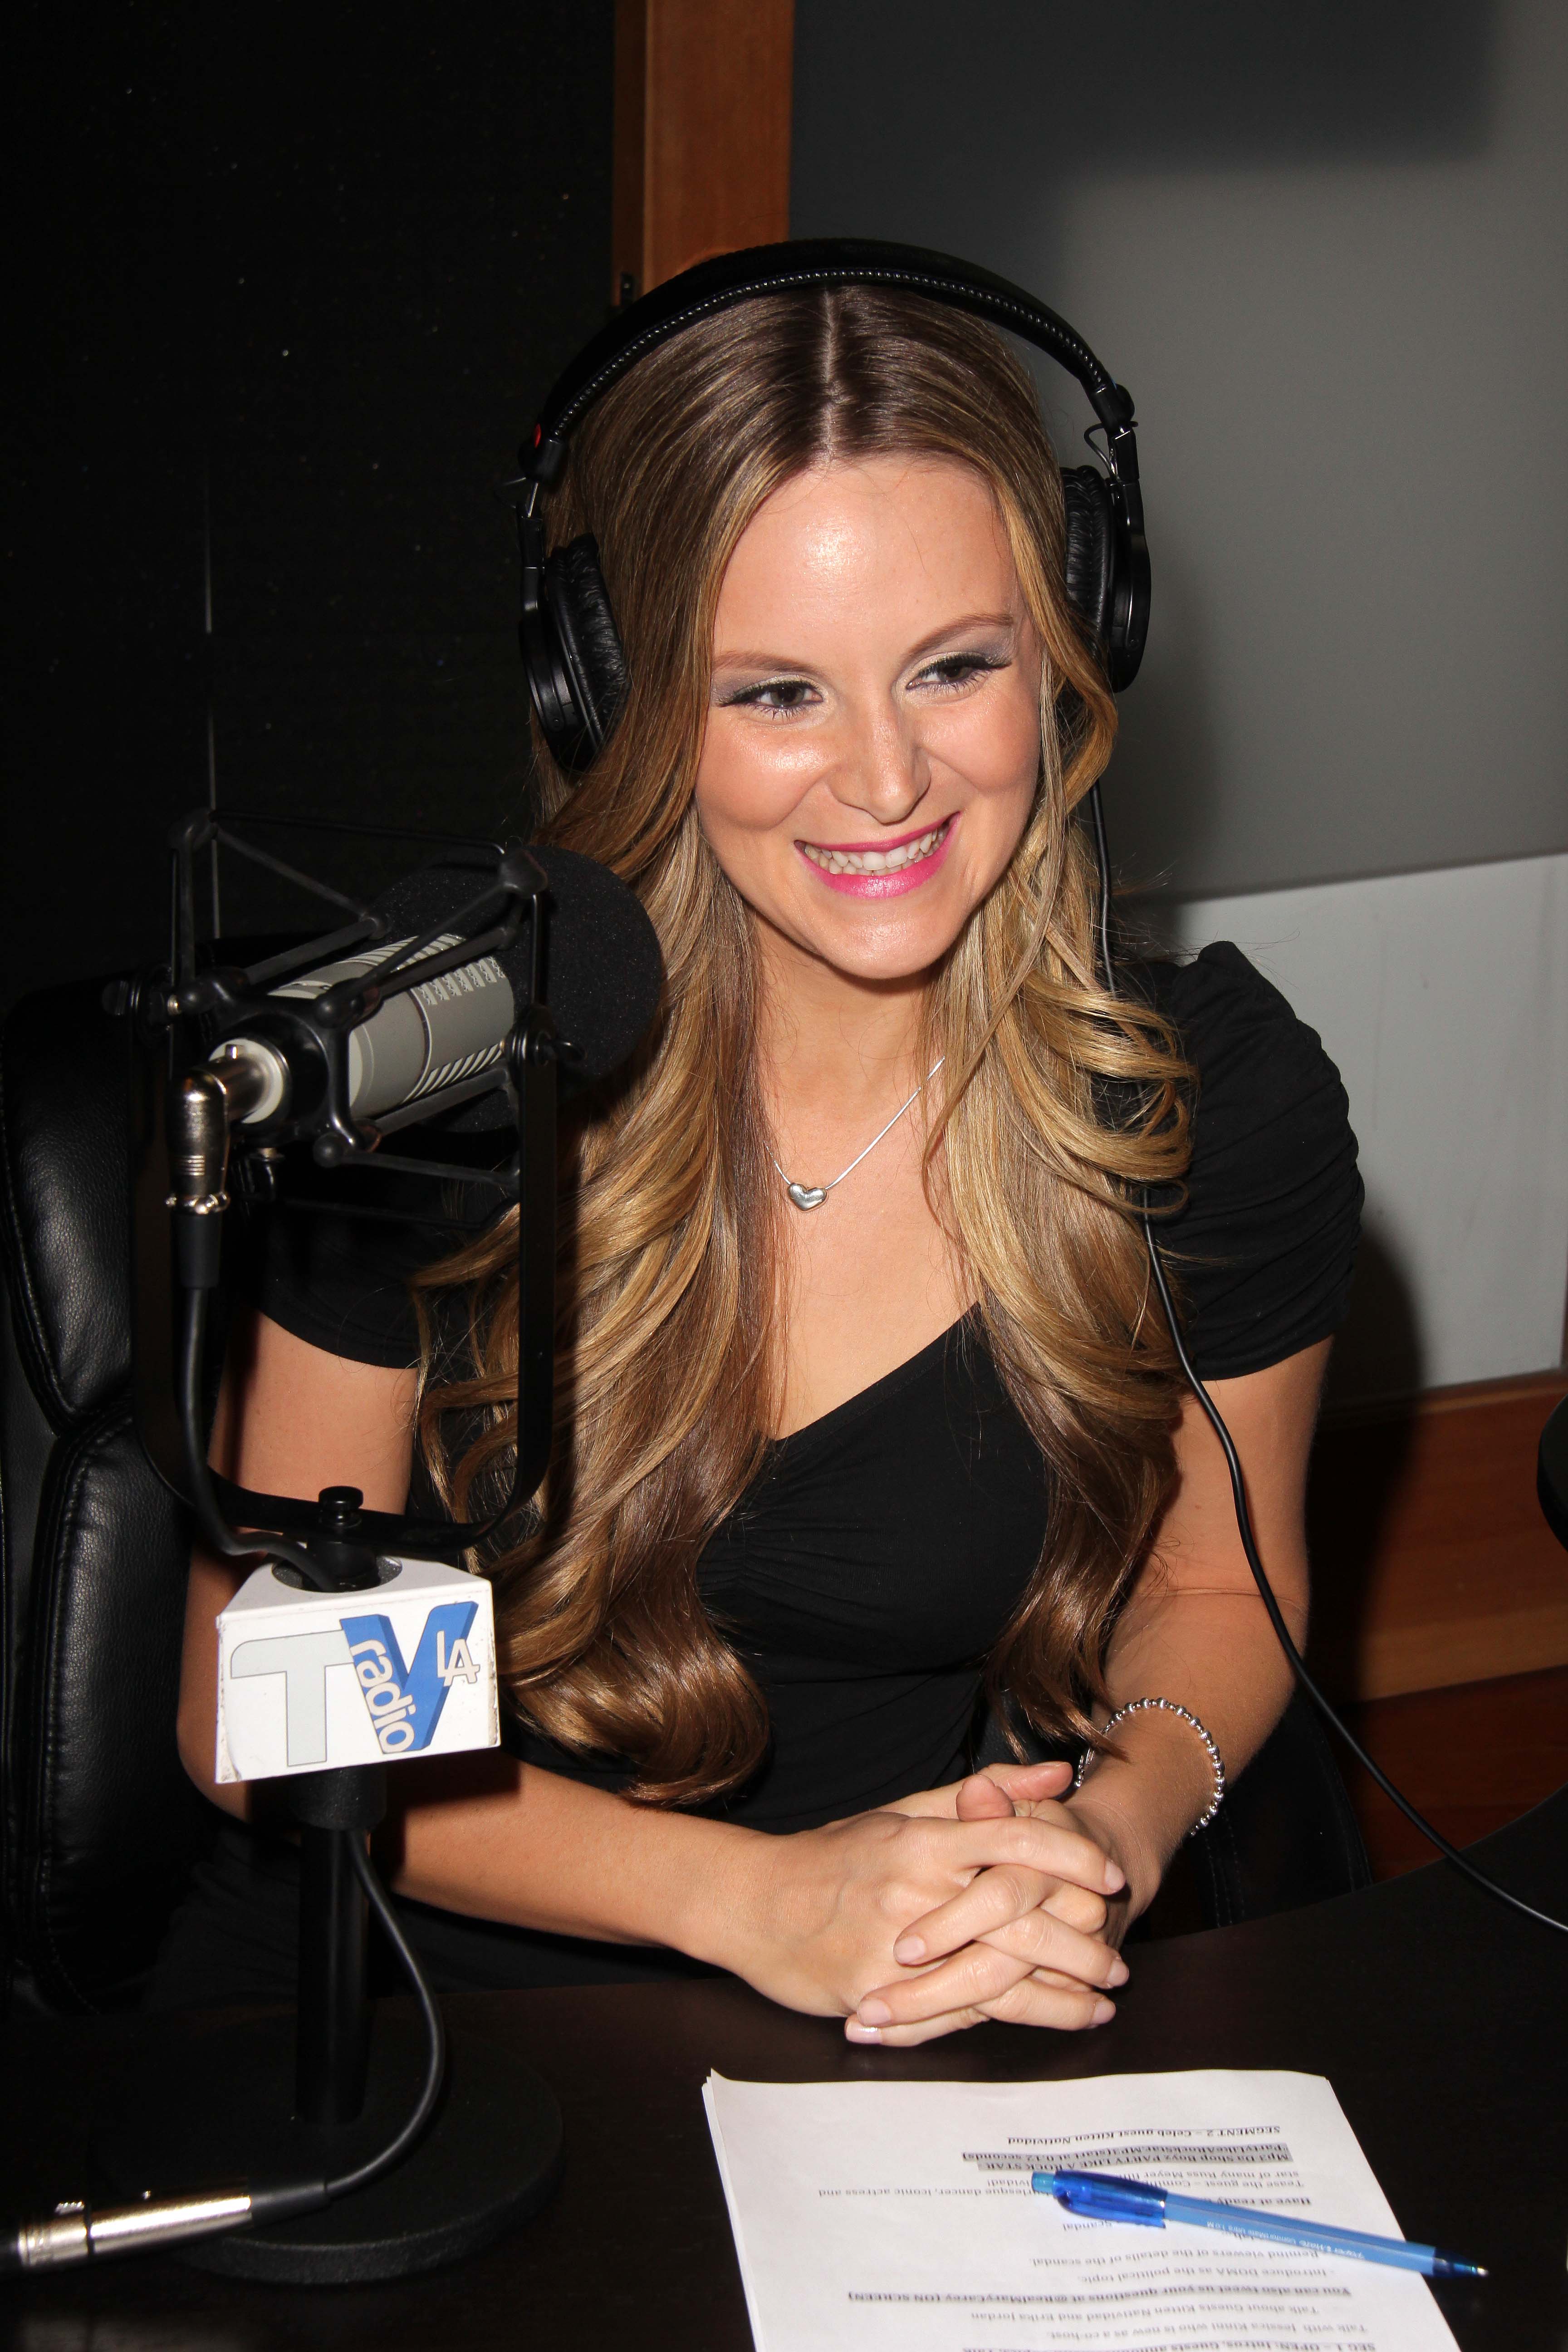 Jessica Kinni Guest Co-Hosts on TradioV's Politically Naughty with Mary Carey